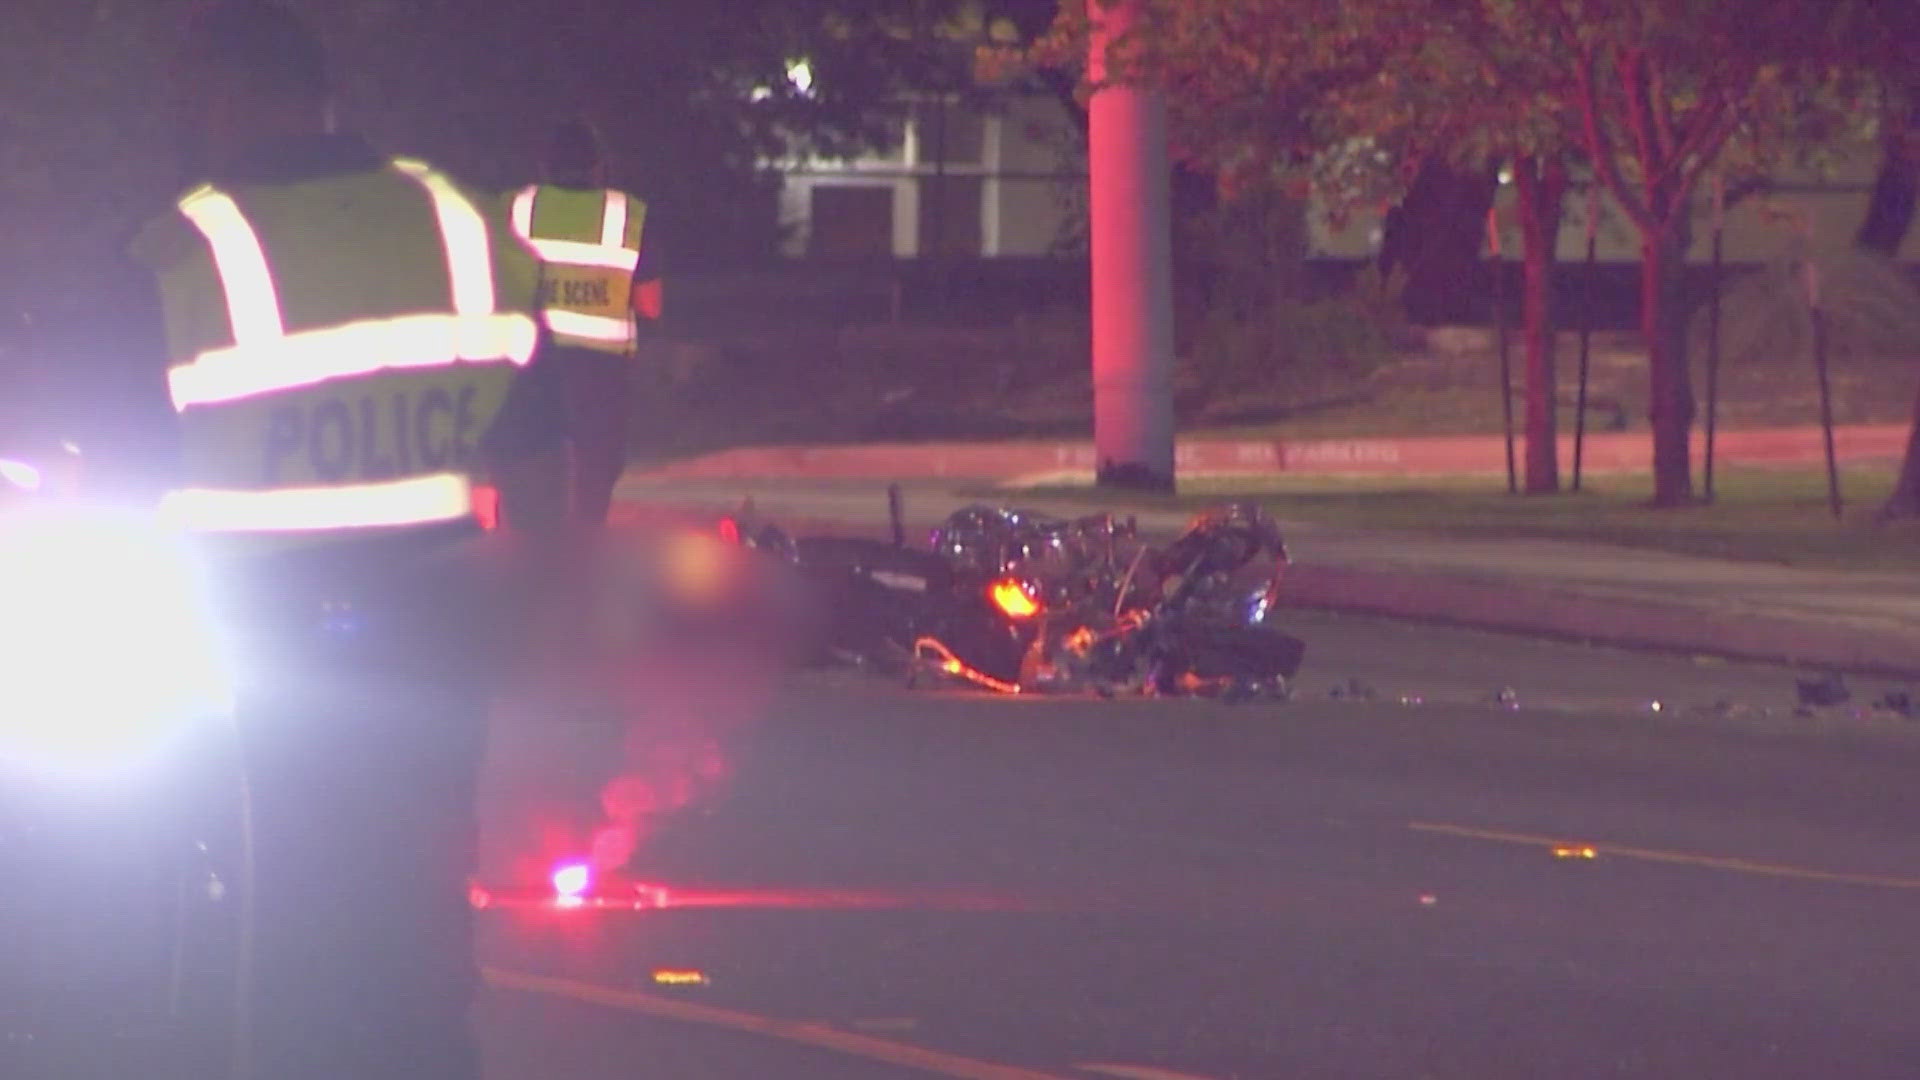 Another motorcyclist had life-threatening injuries.